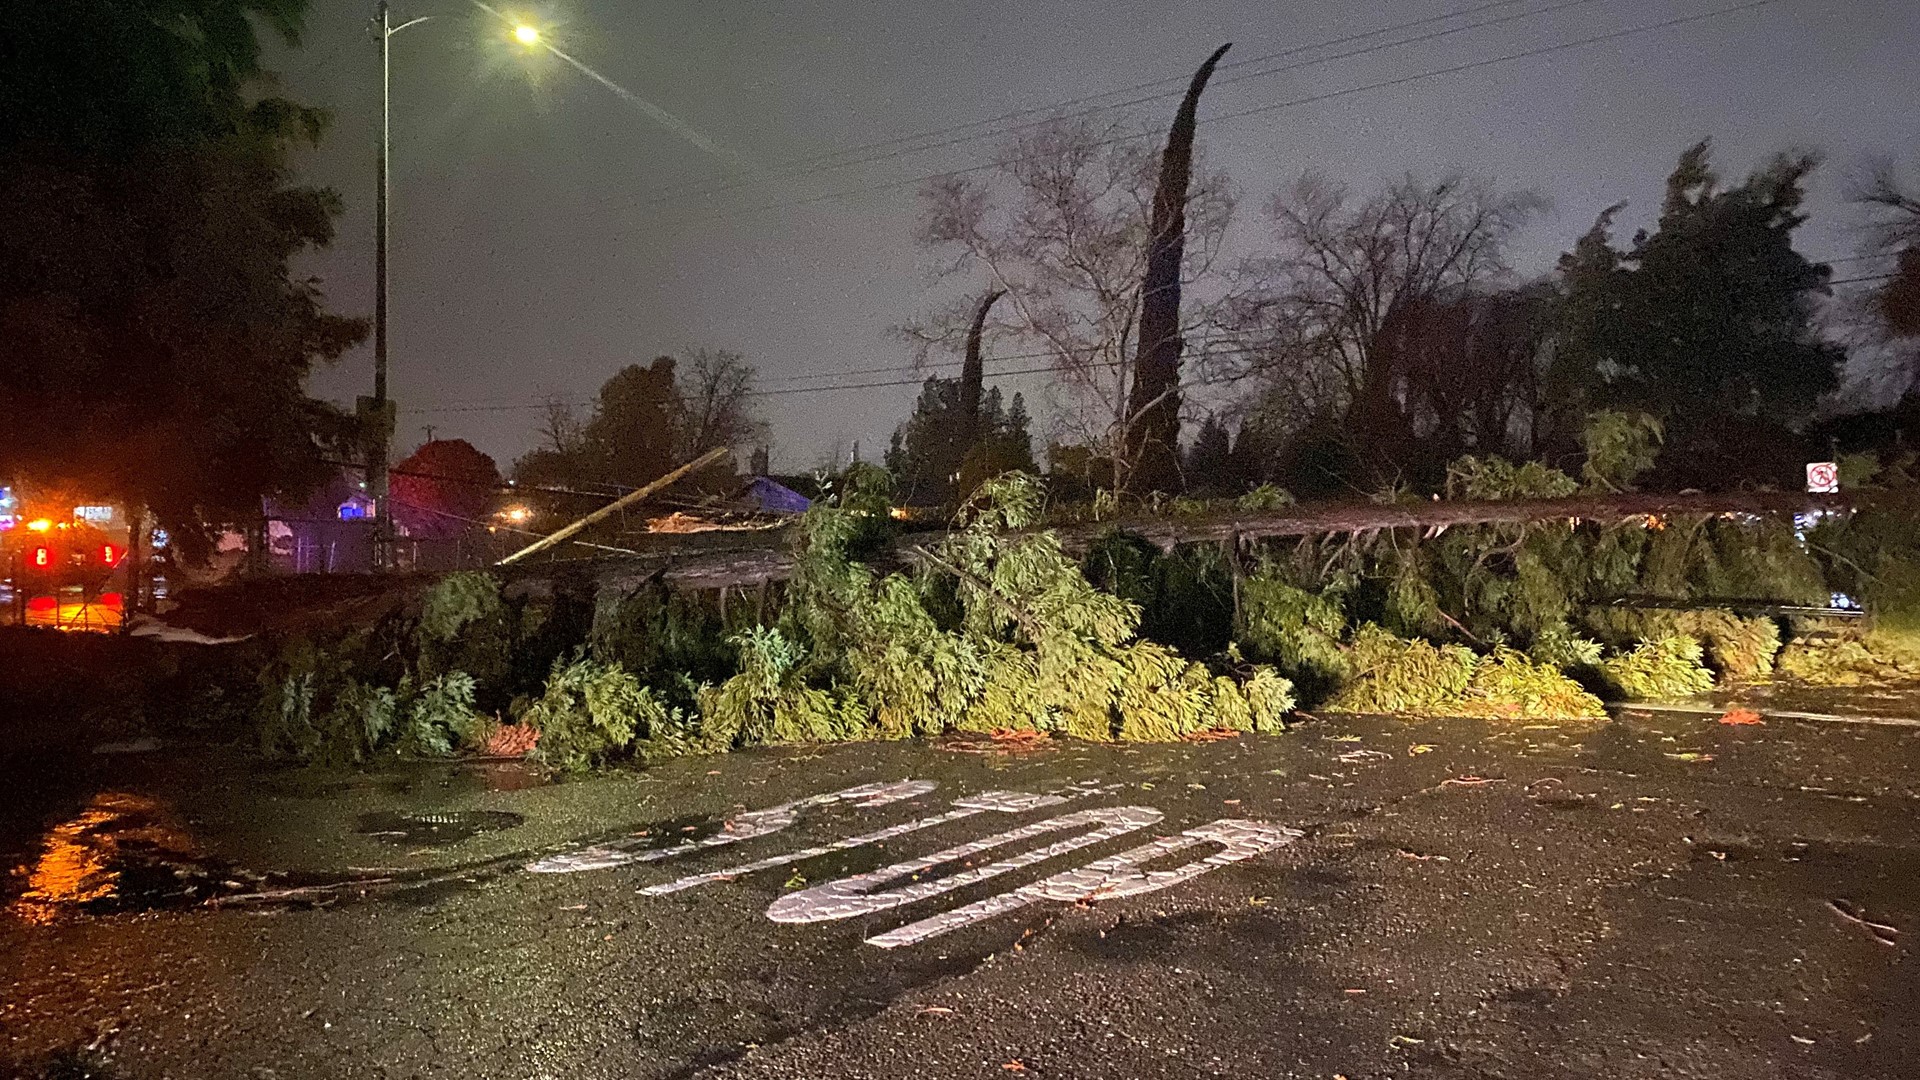 Tens of thousands of residents across Northern California are reporting power outages as a major winter storm bears down.